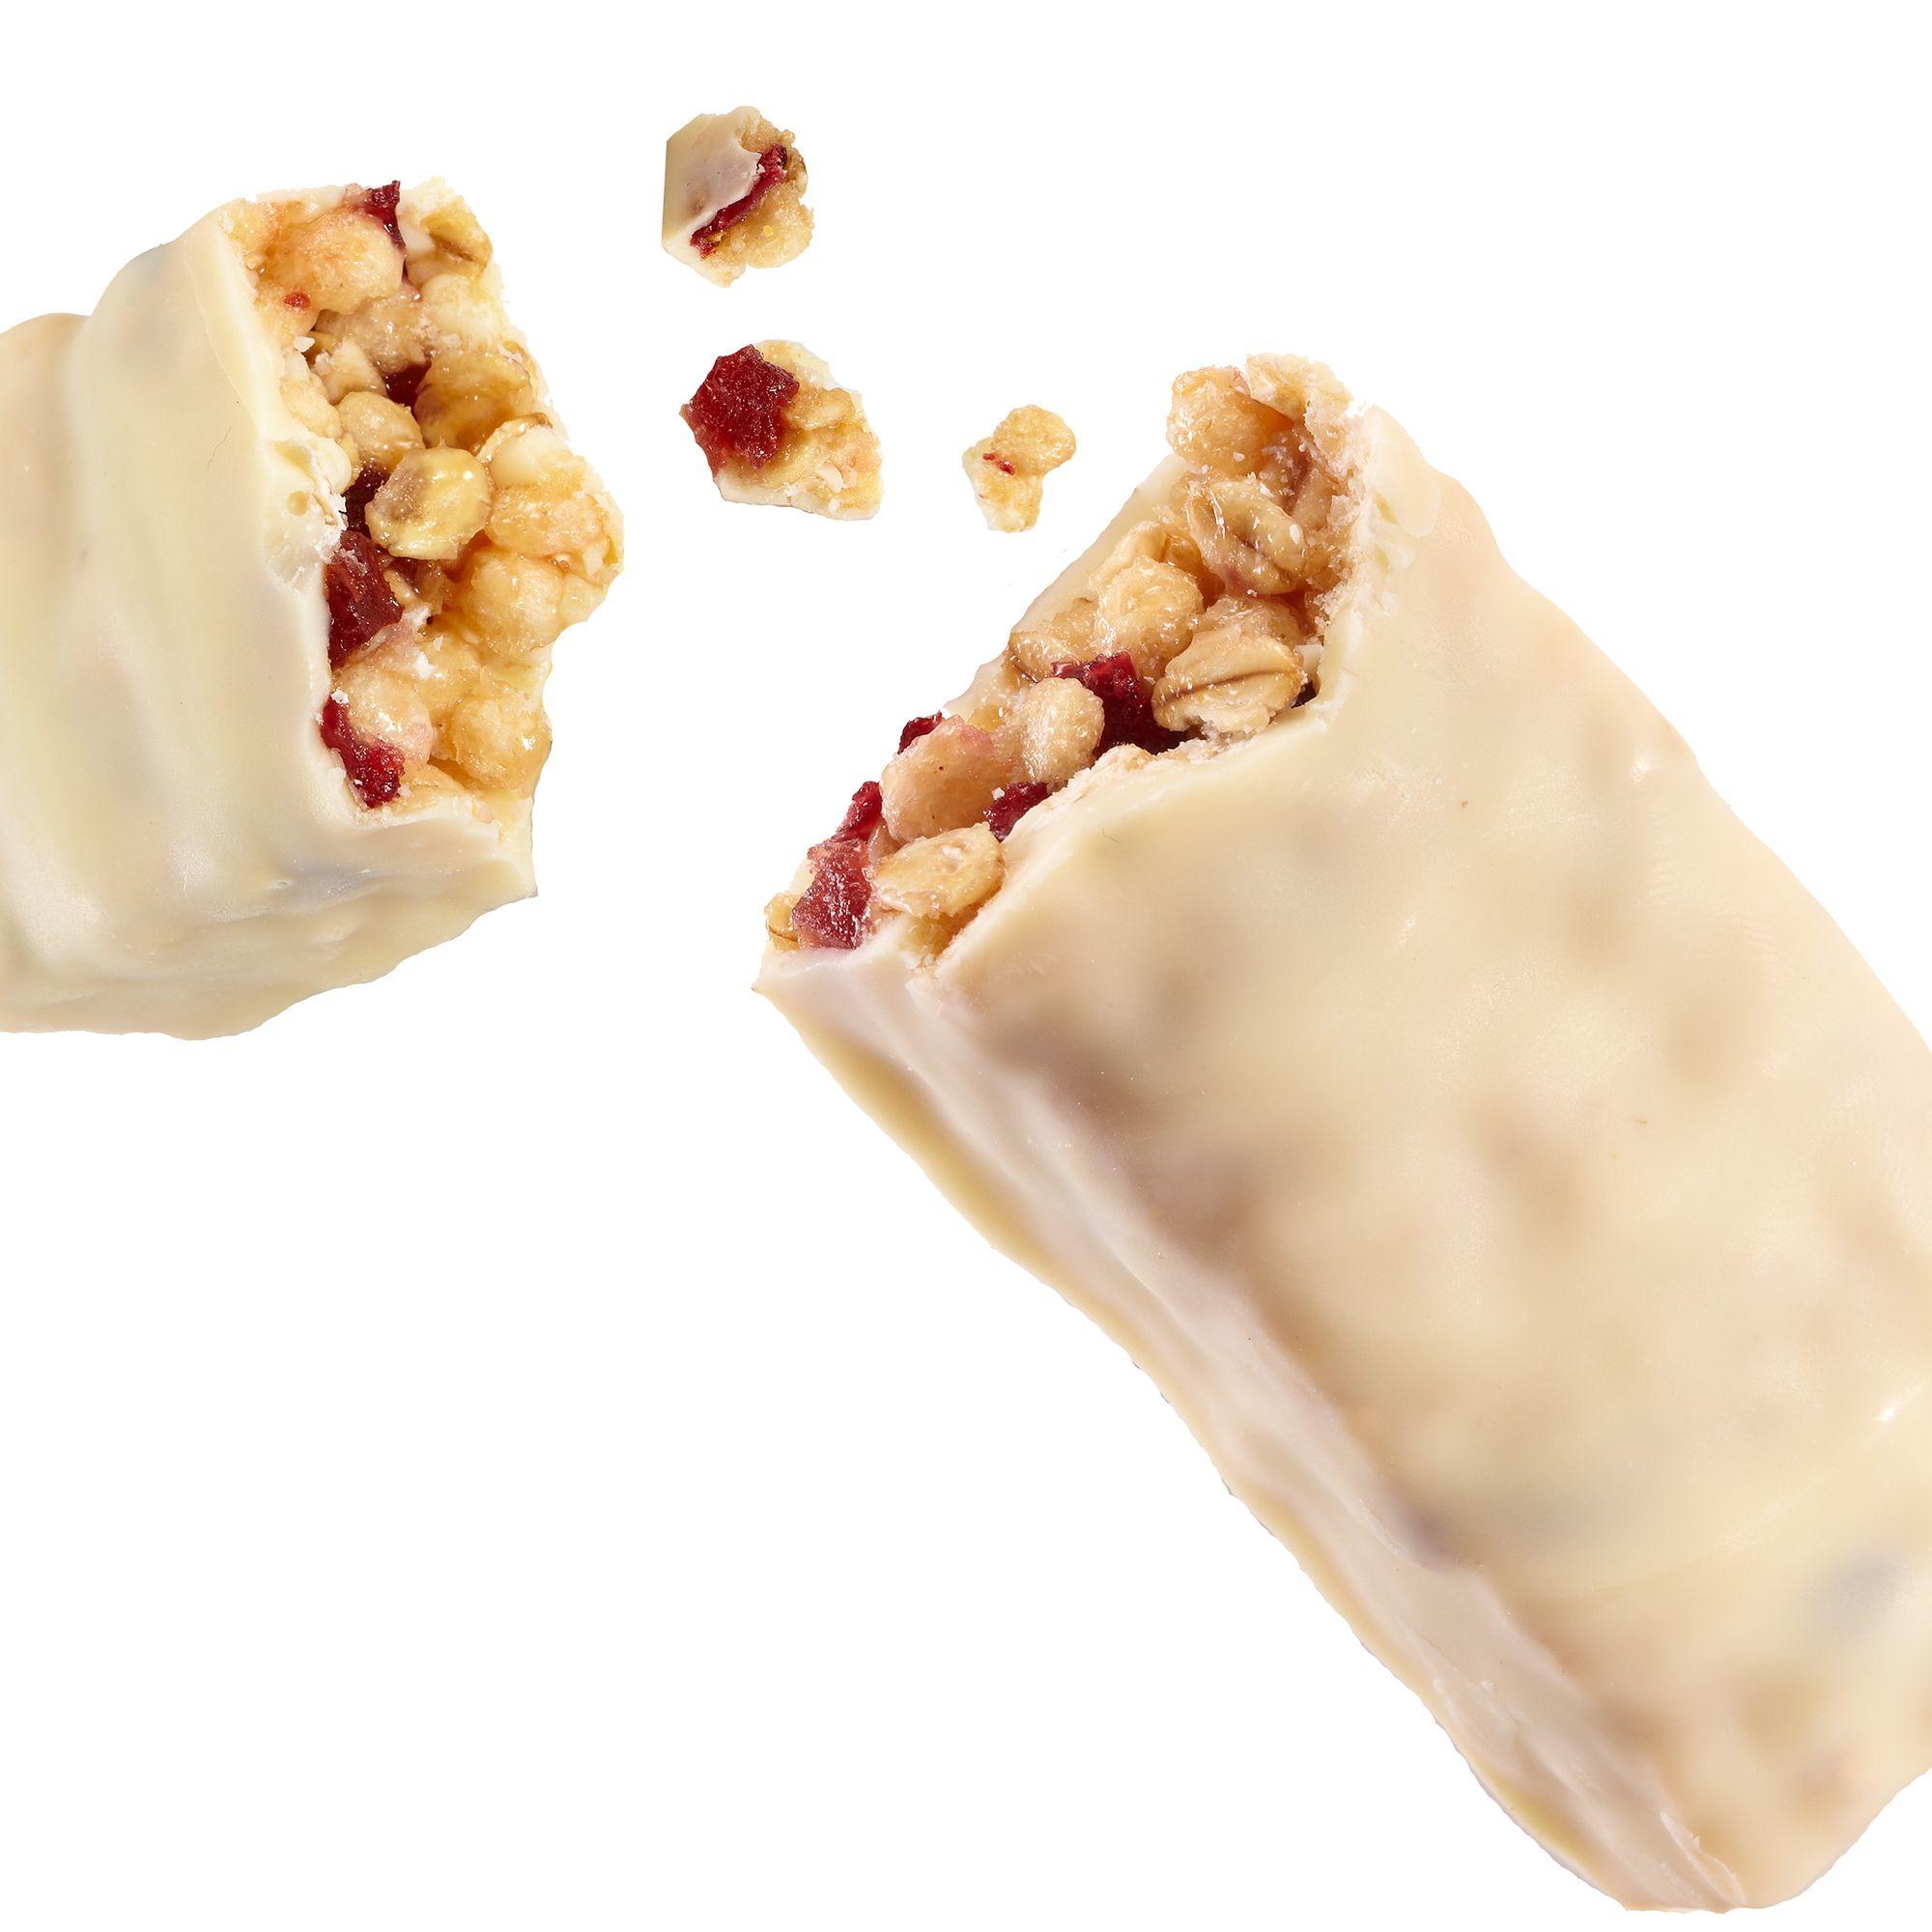 Choco Cereals White Chocolate Coated Cereal Bar 32g - Red Berries 2/2